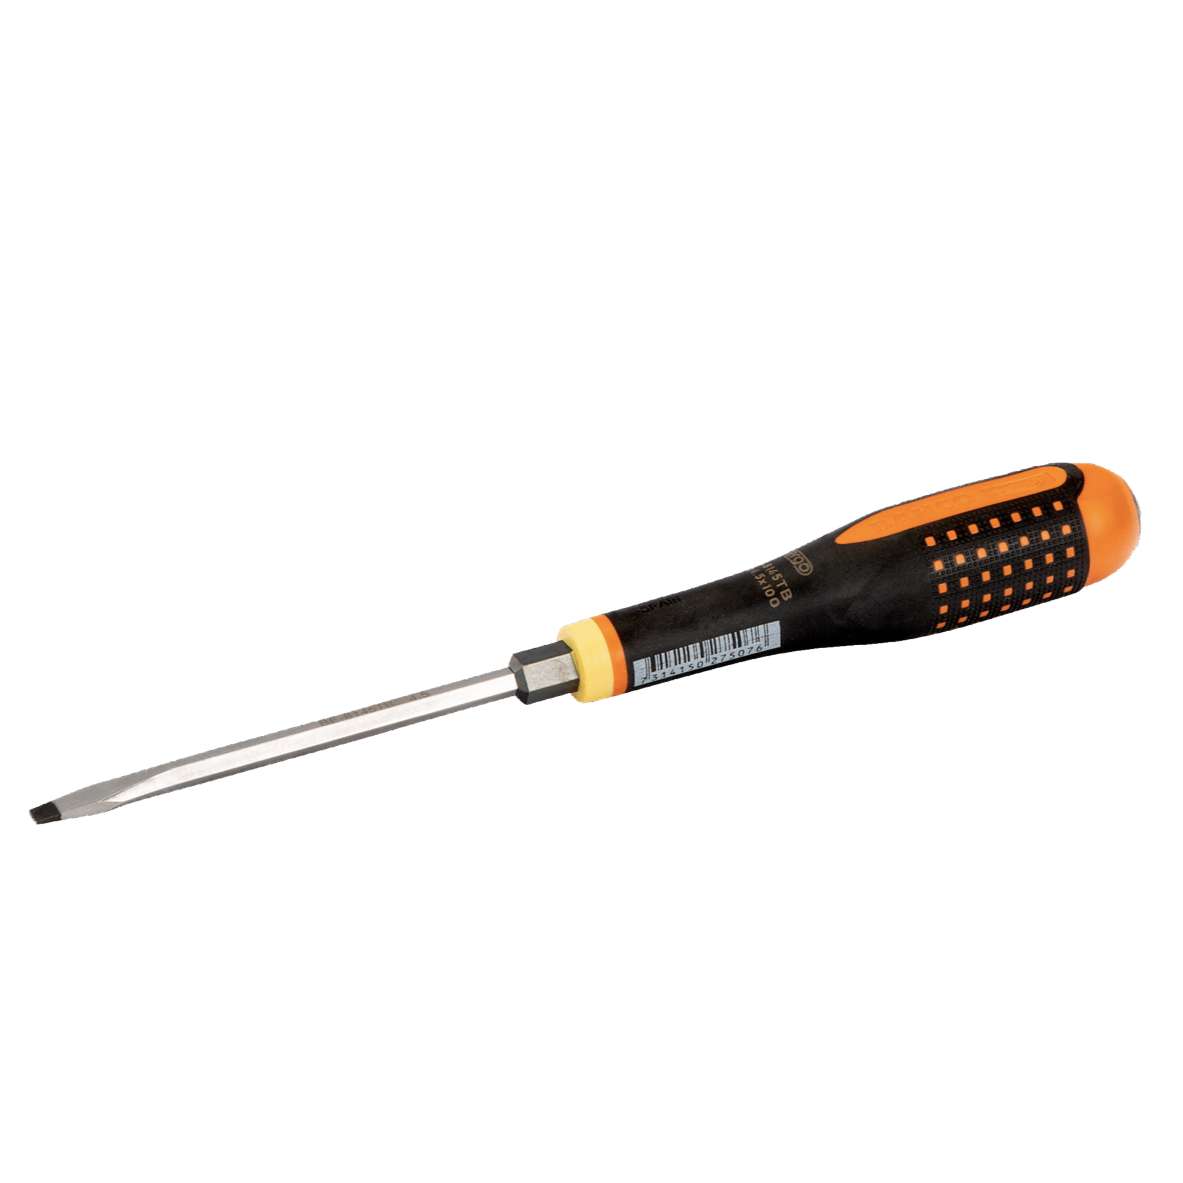 3” Slotted Screw Driver